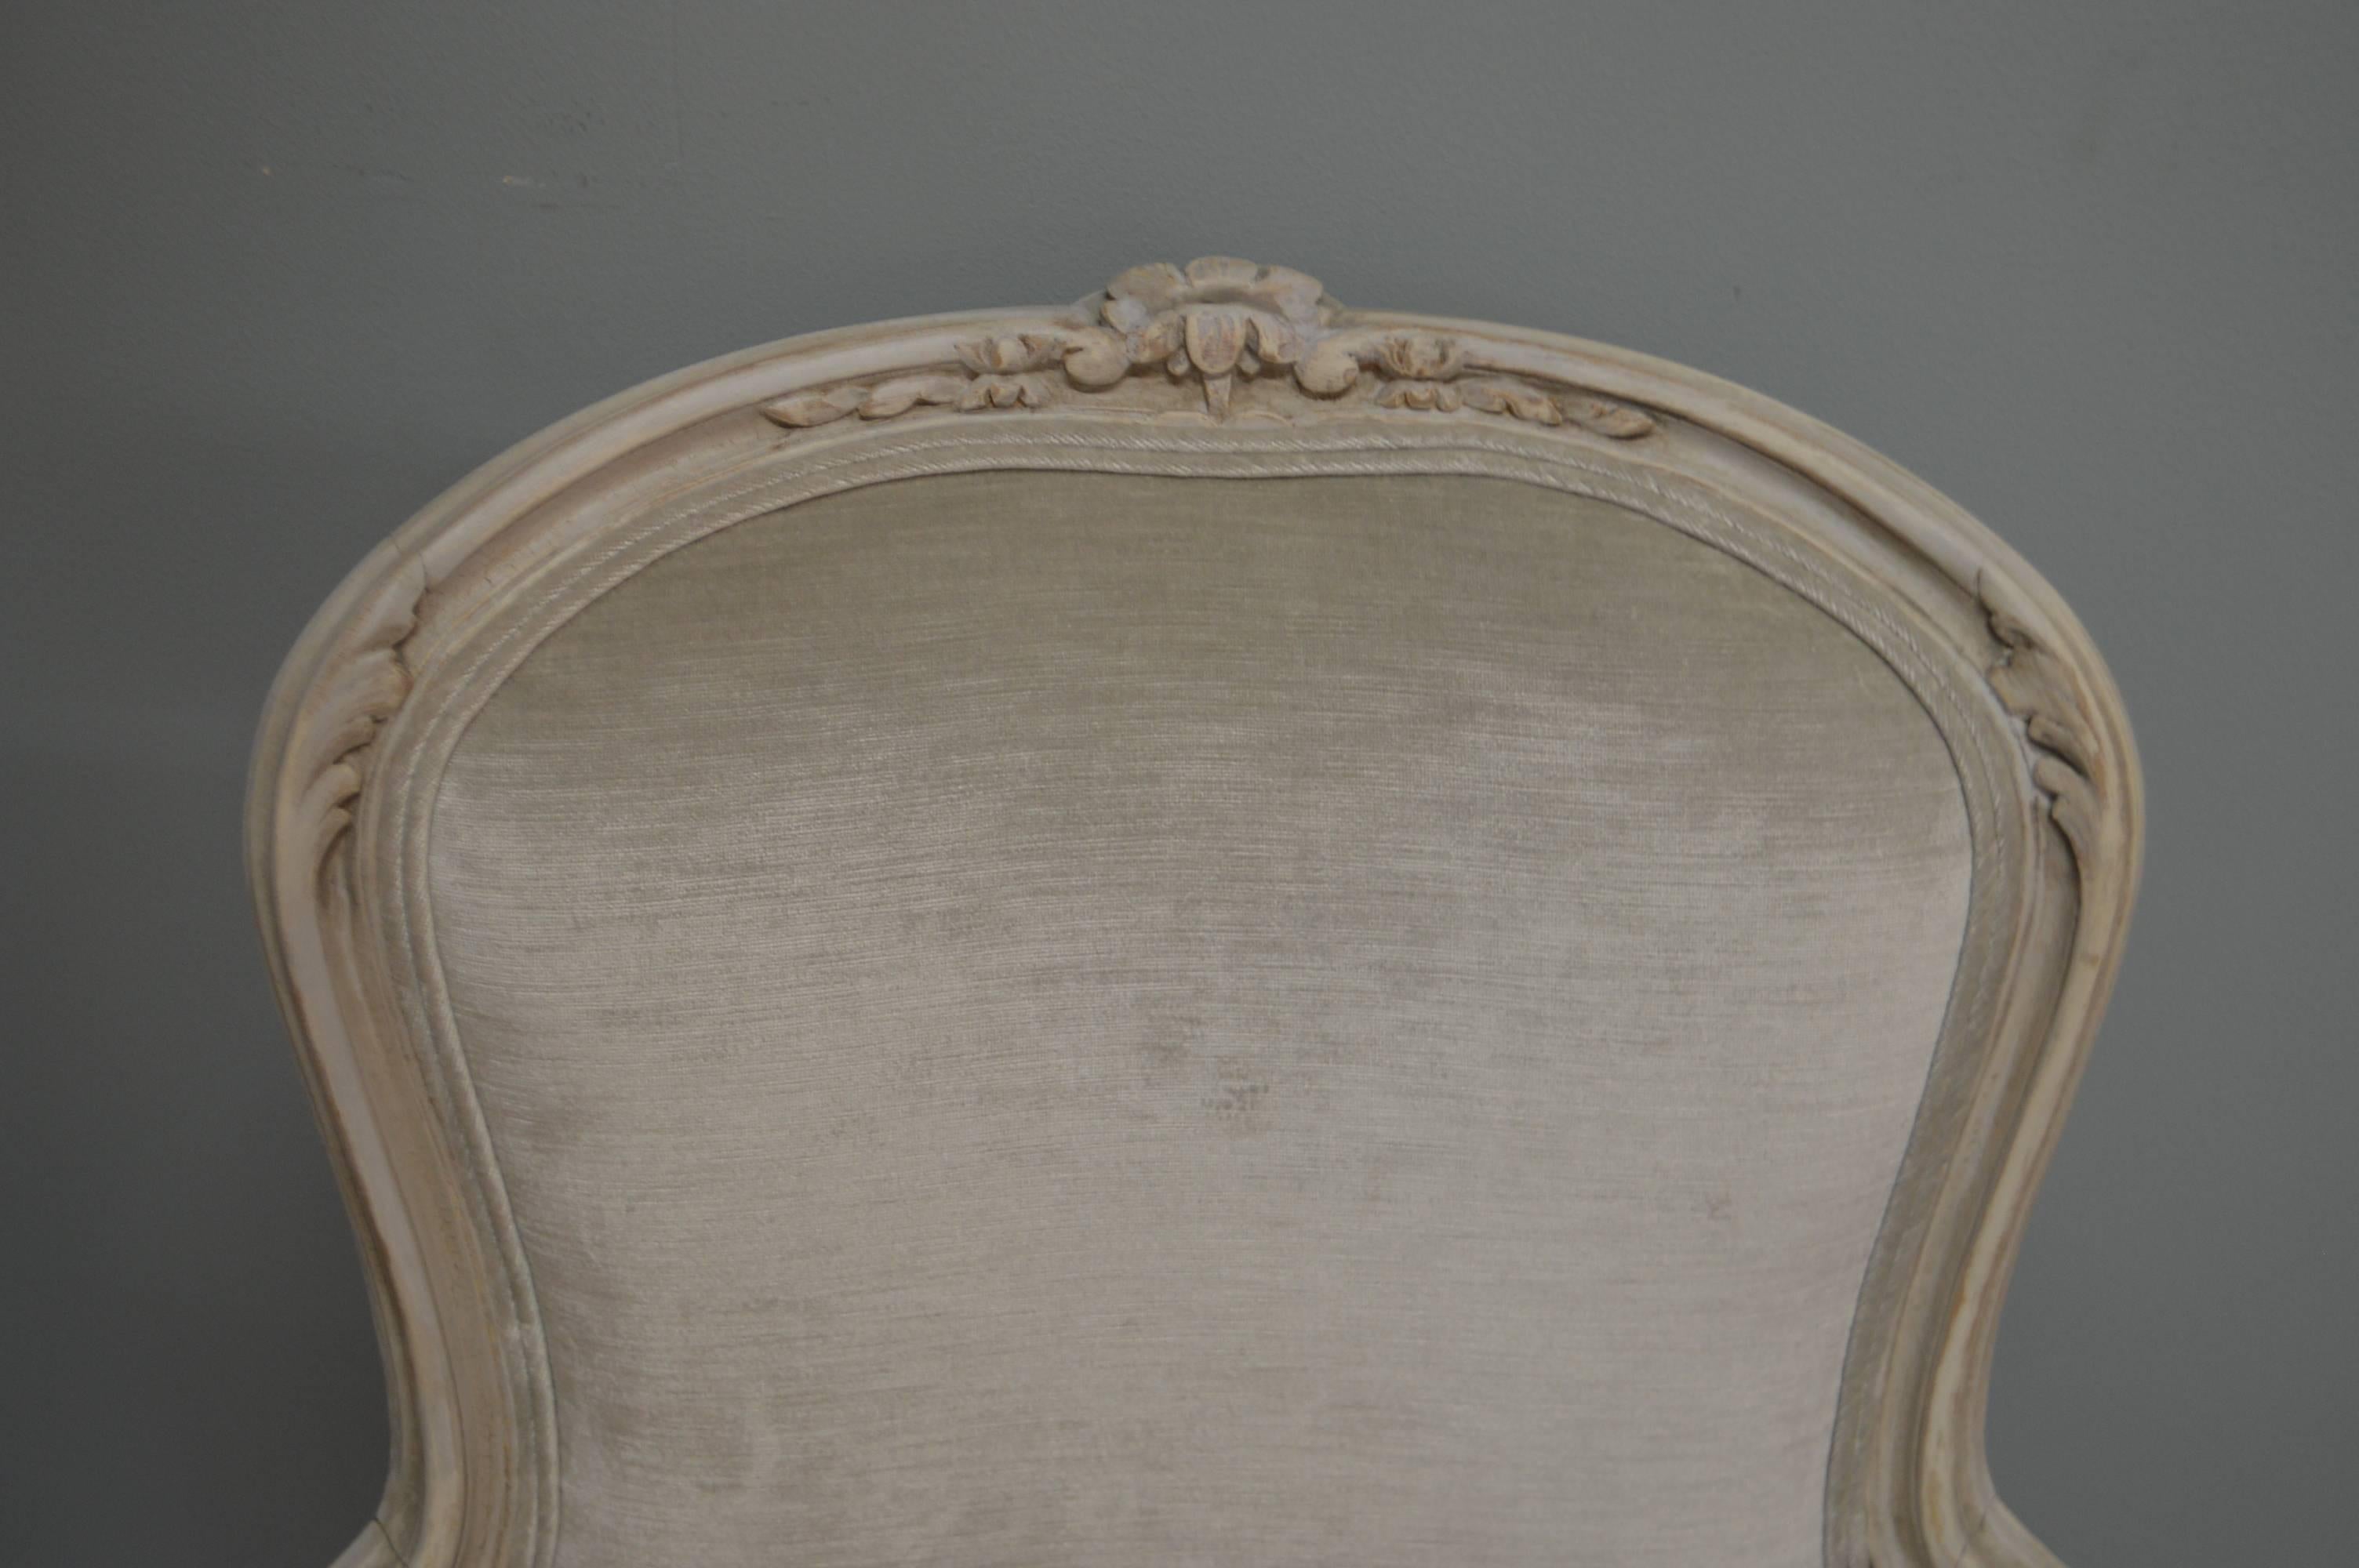 The Louis XV style painted frame of these bergere chairs is from France, circa 1920, with attractive floral hand-carved details.
The original frame has been slightly retouched to harmonize with the luxurious light grey velvet fabric.
The bergeres